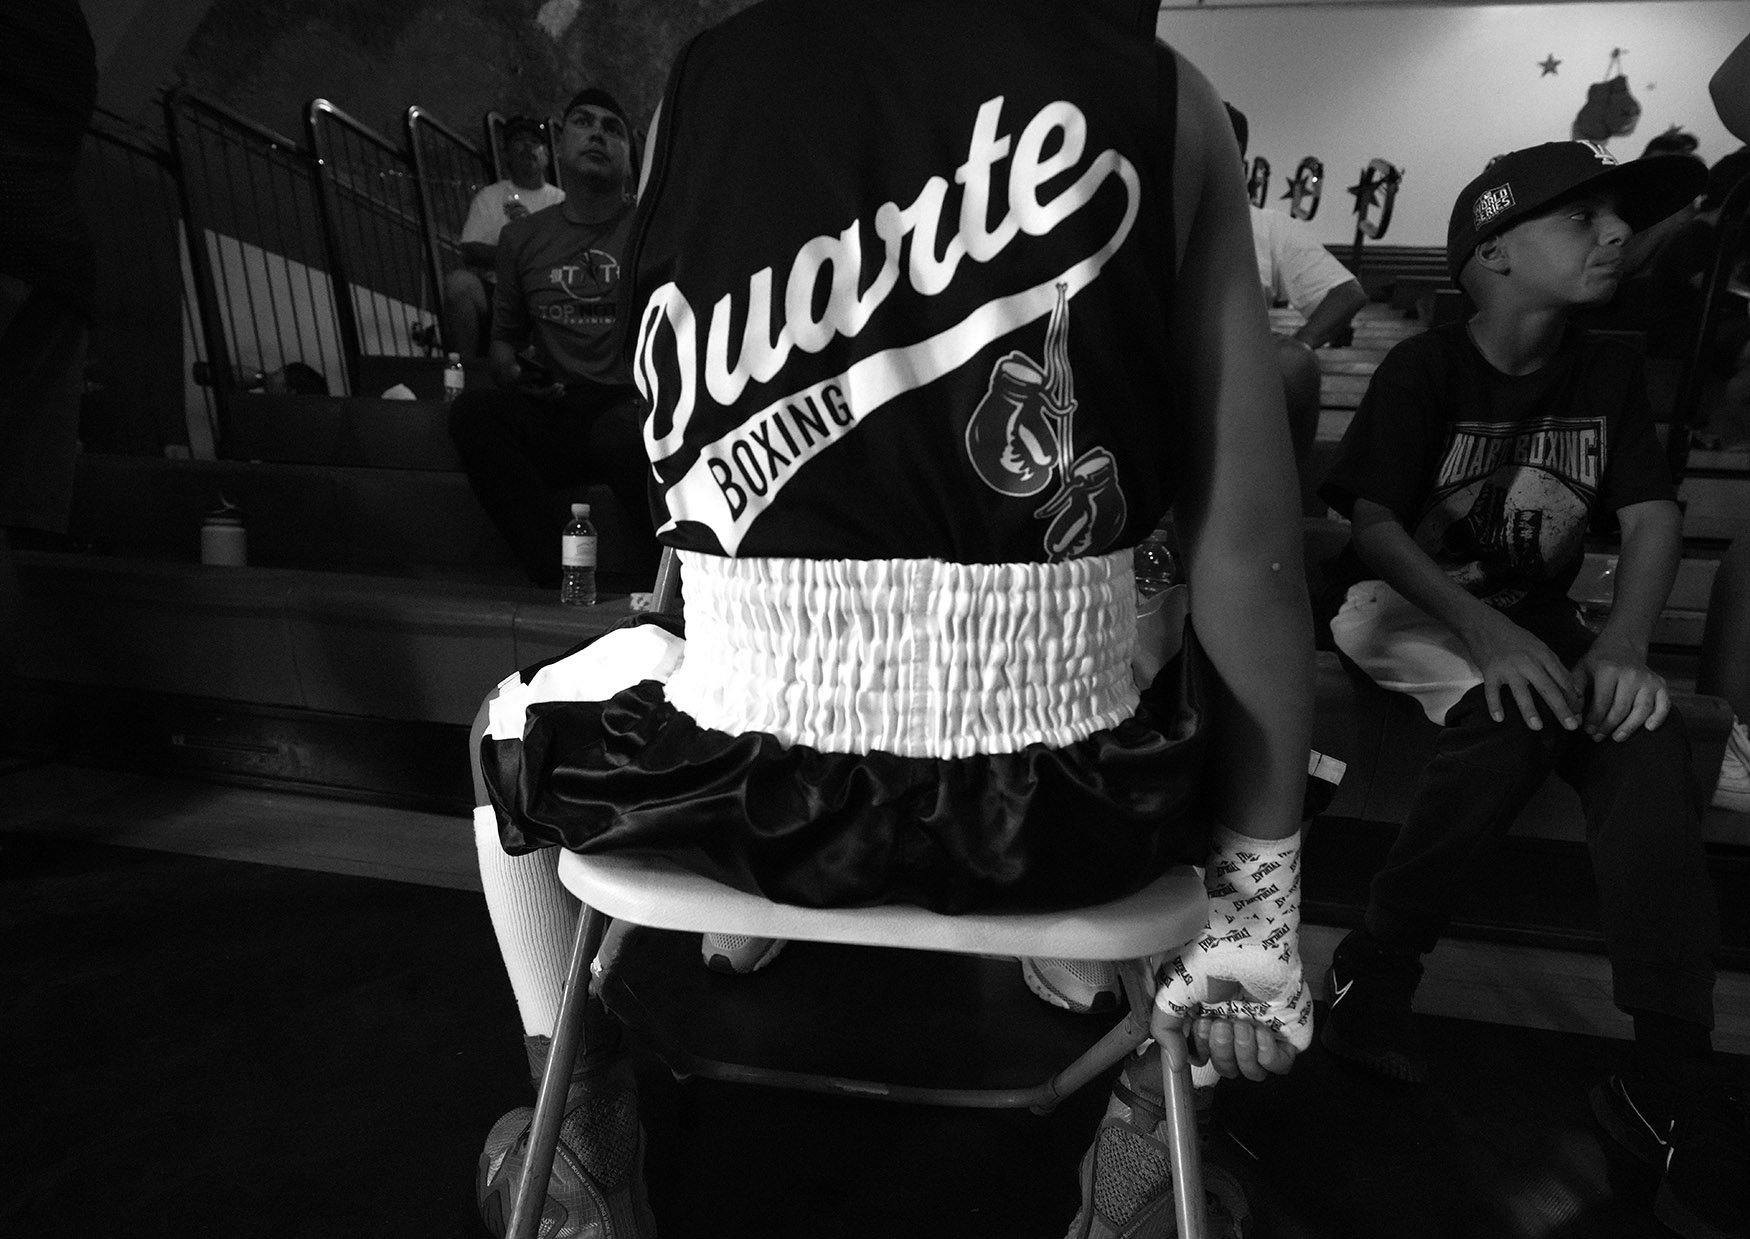  Boxer Benjamin Valenzuela has his hands taped prior to his bout during the annual amateur boxing show staged by the Duarte Boxing Club at Duarte High School in Duarte on Saturday, August 13, 2022.  